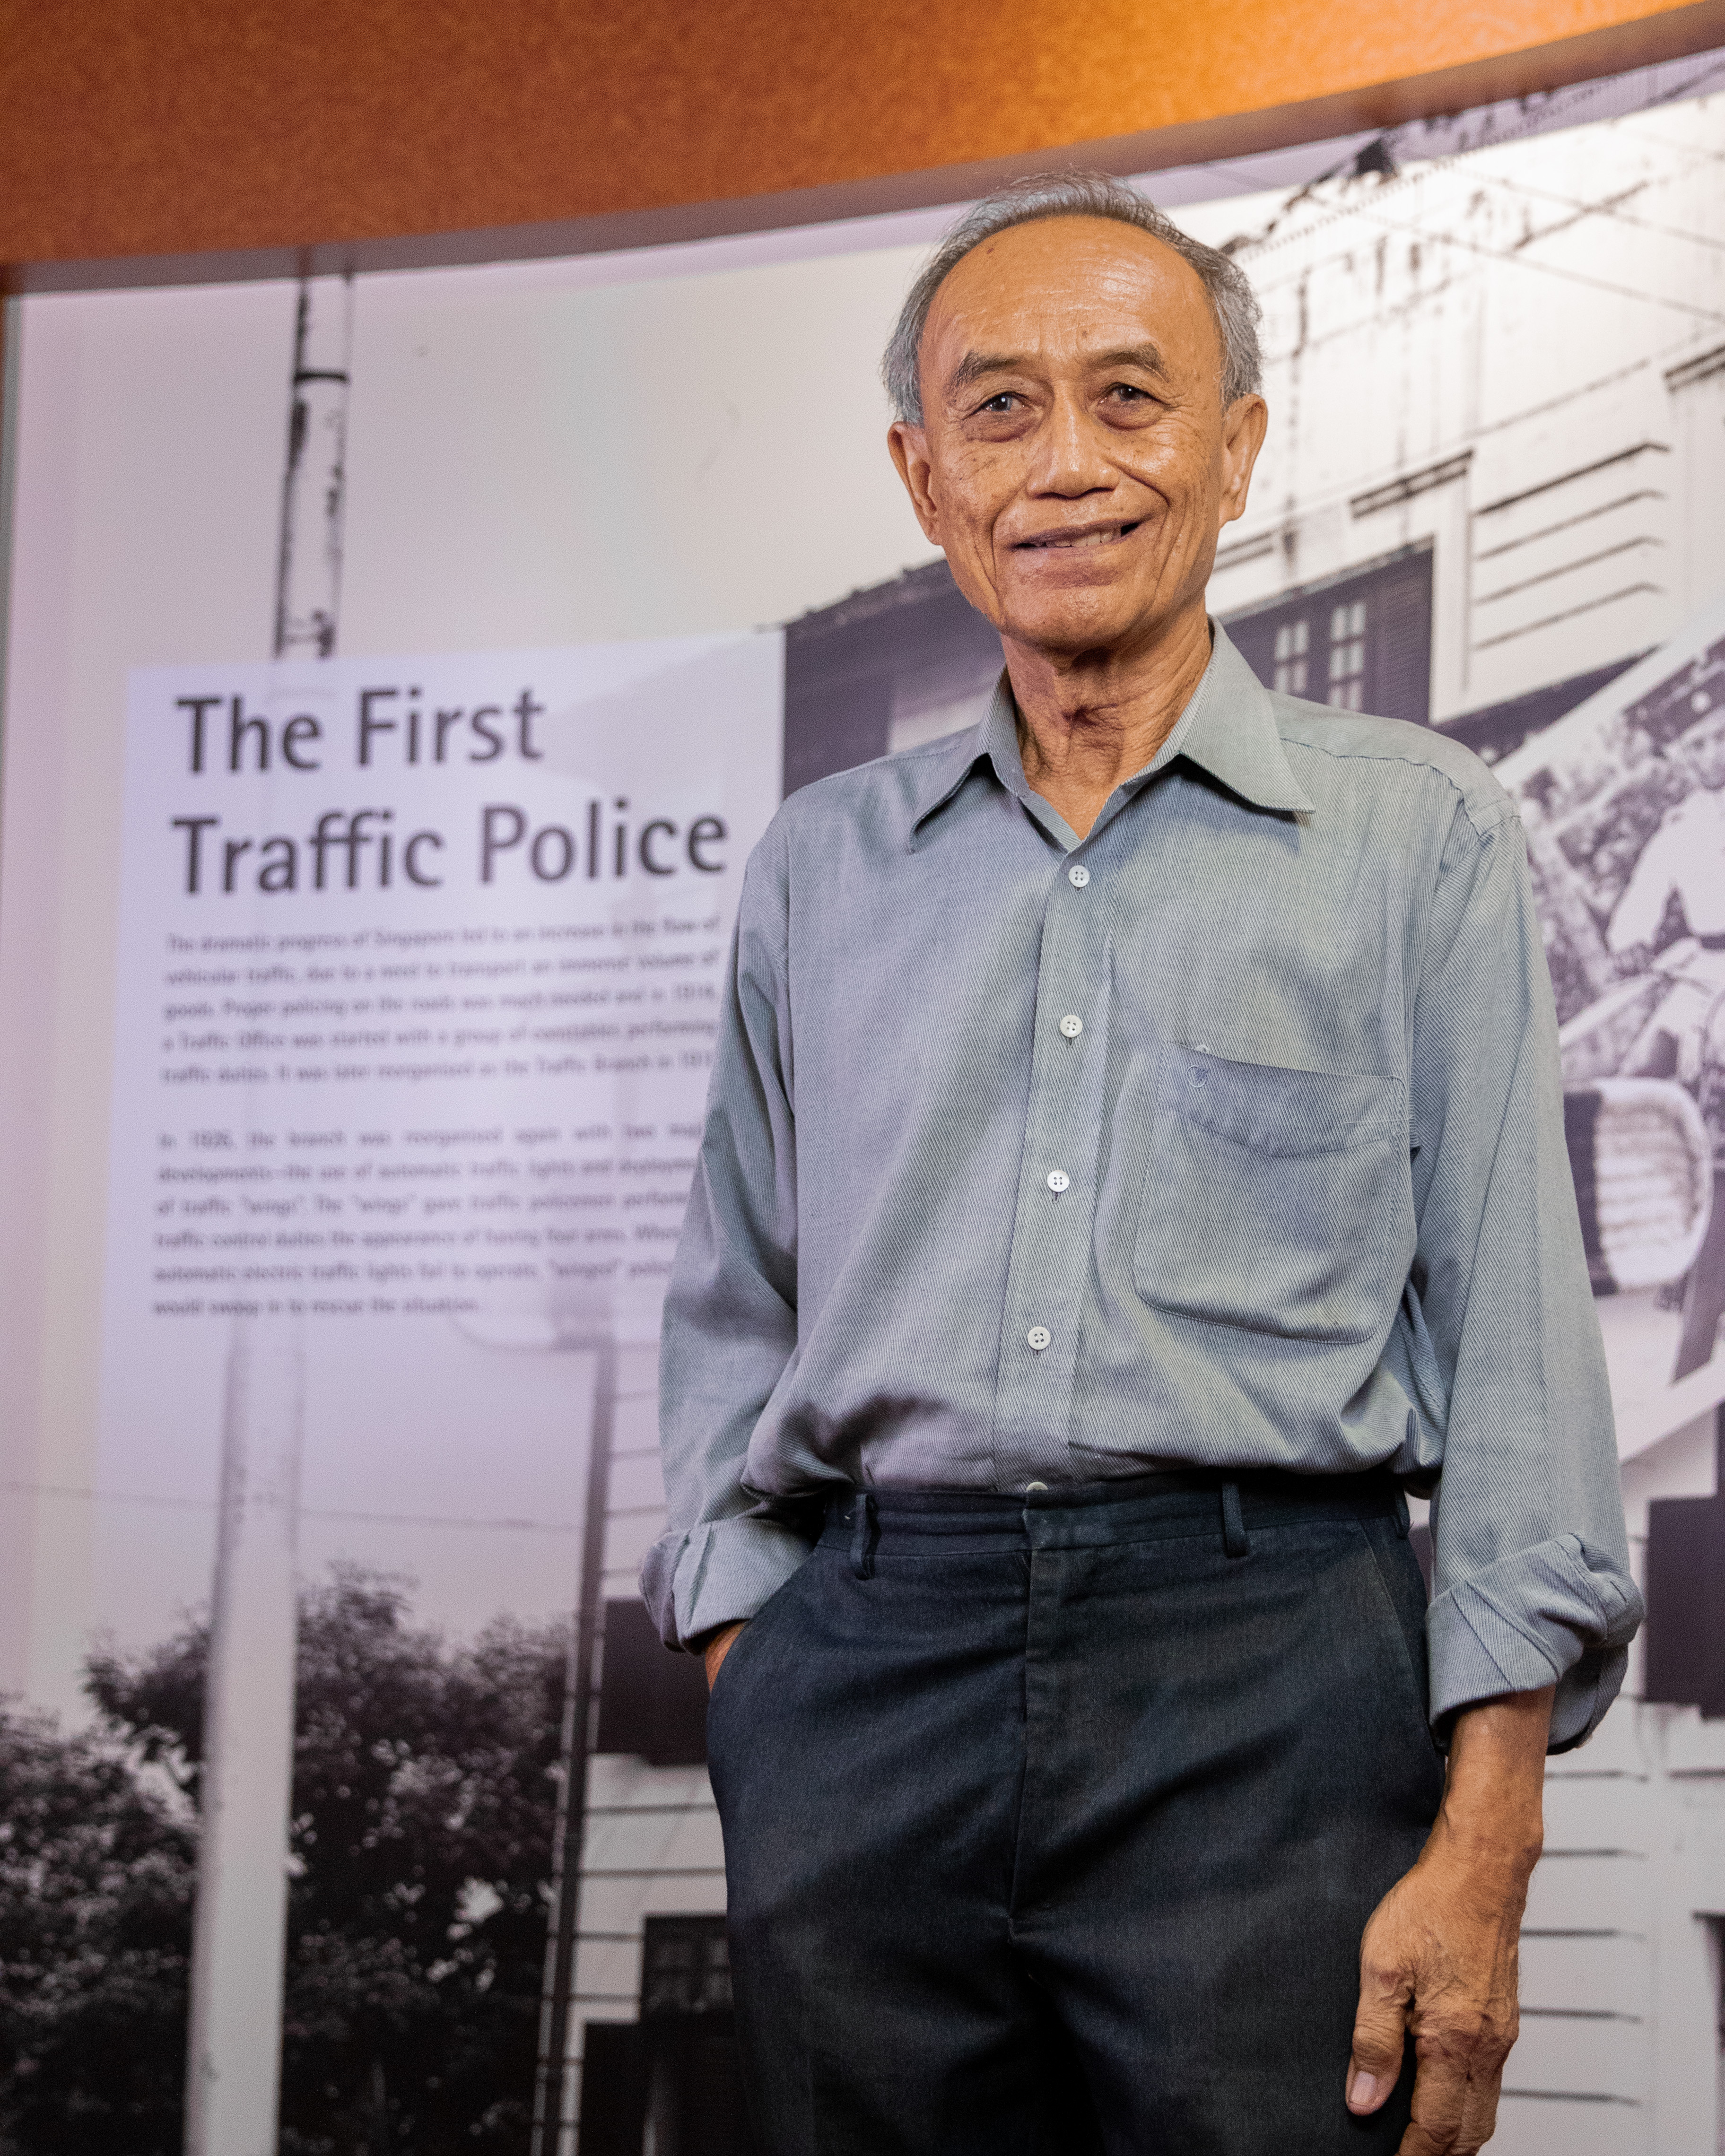 Filled with grit and passion, Cpl (Ret) Mahdi served as a TP officer for 22 years